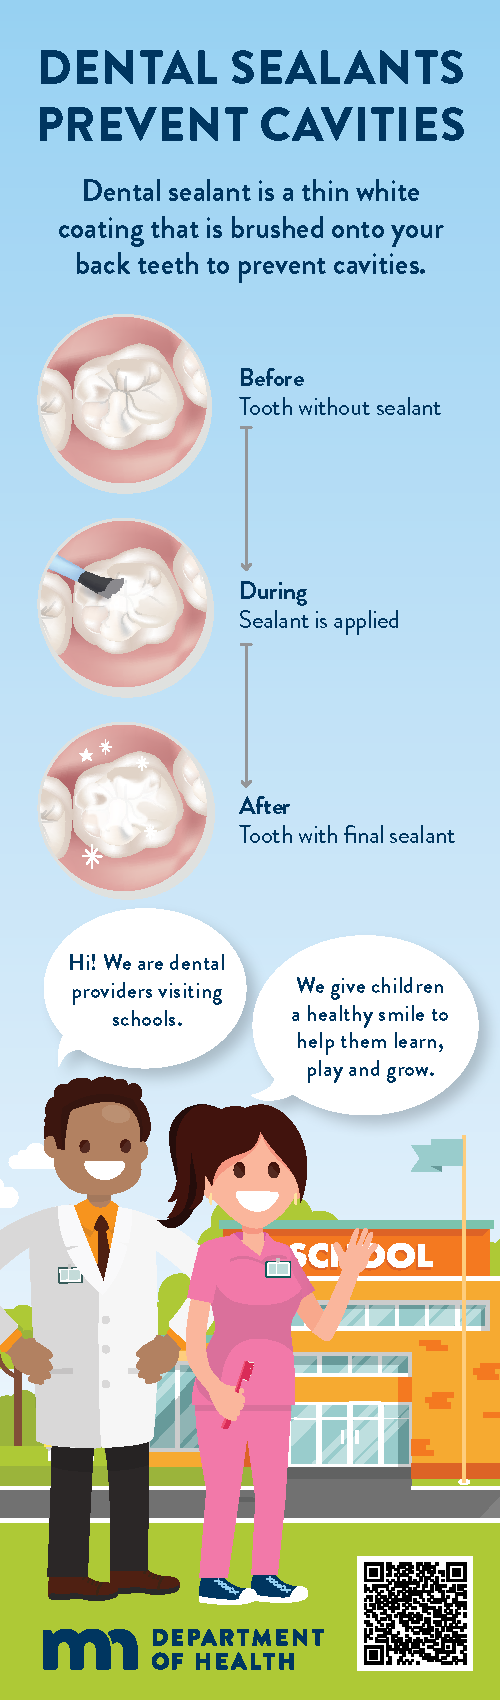 Images of teeth showing the process of applying a sealant.